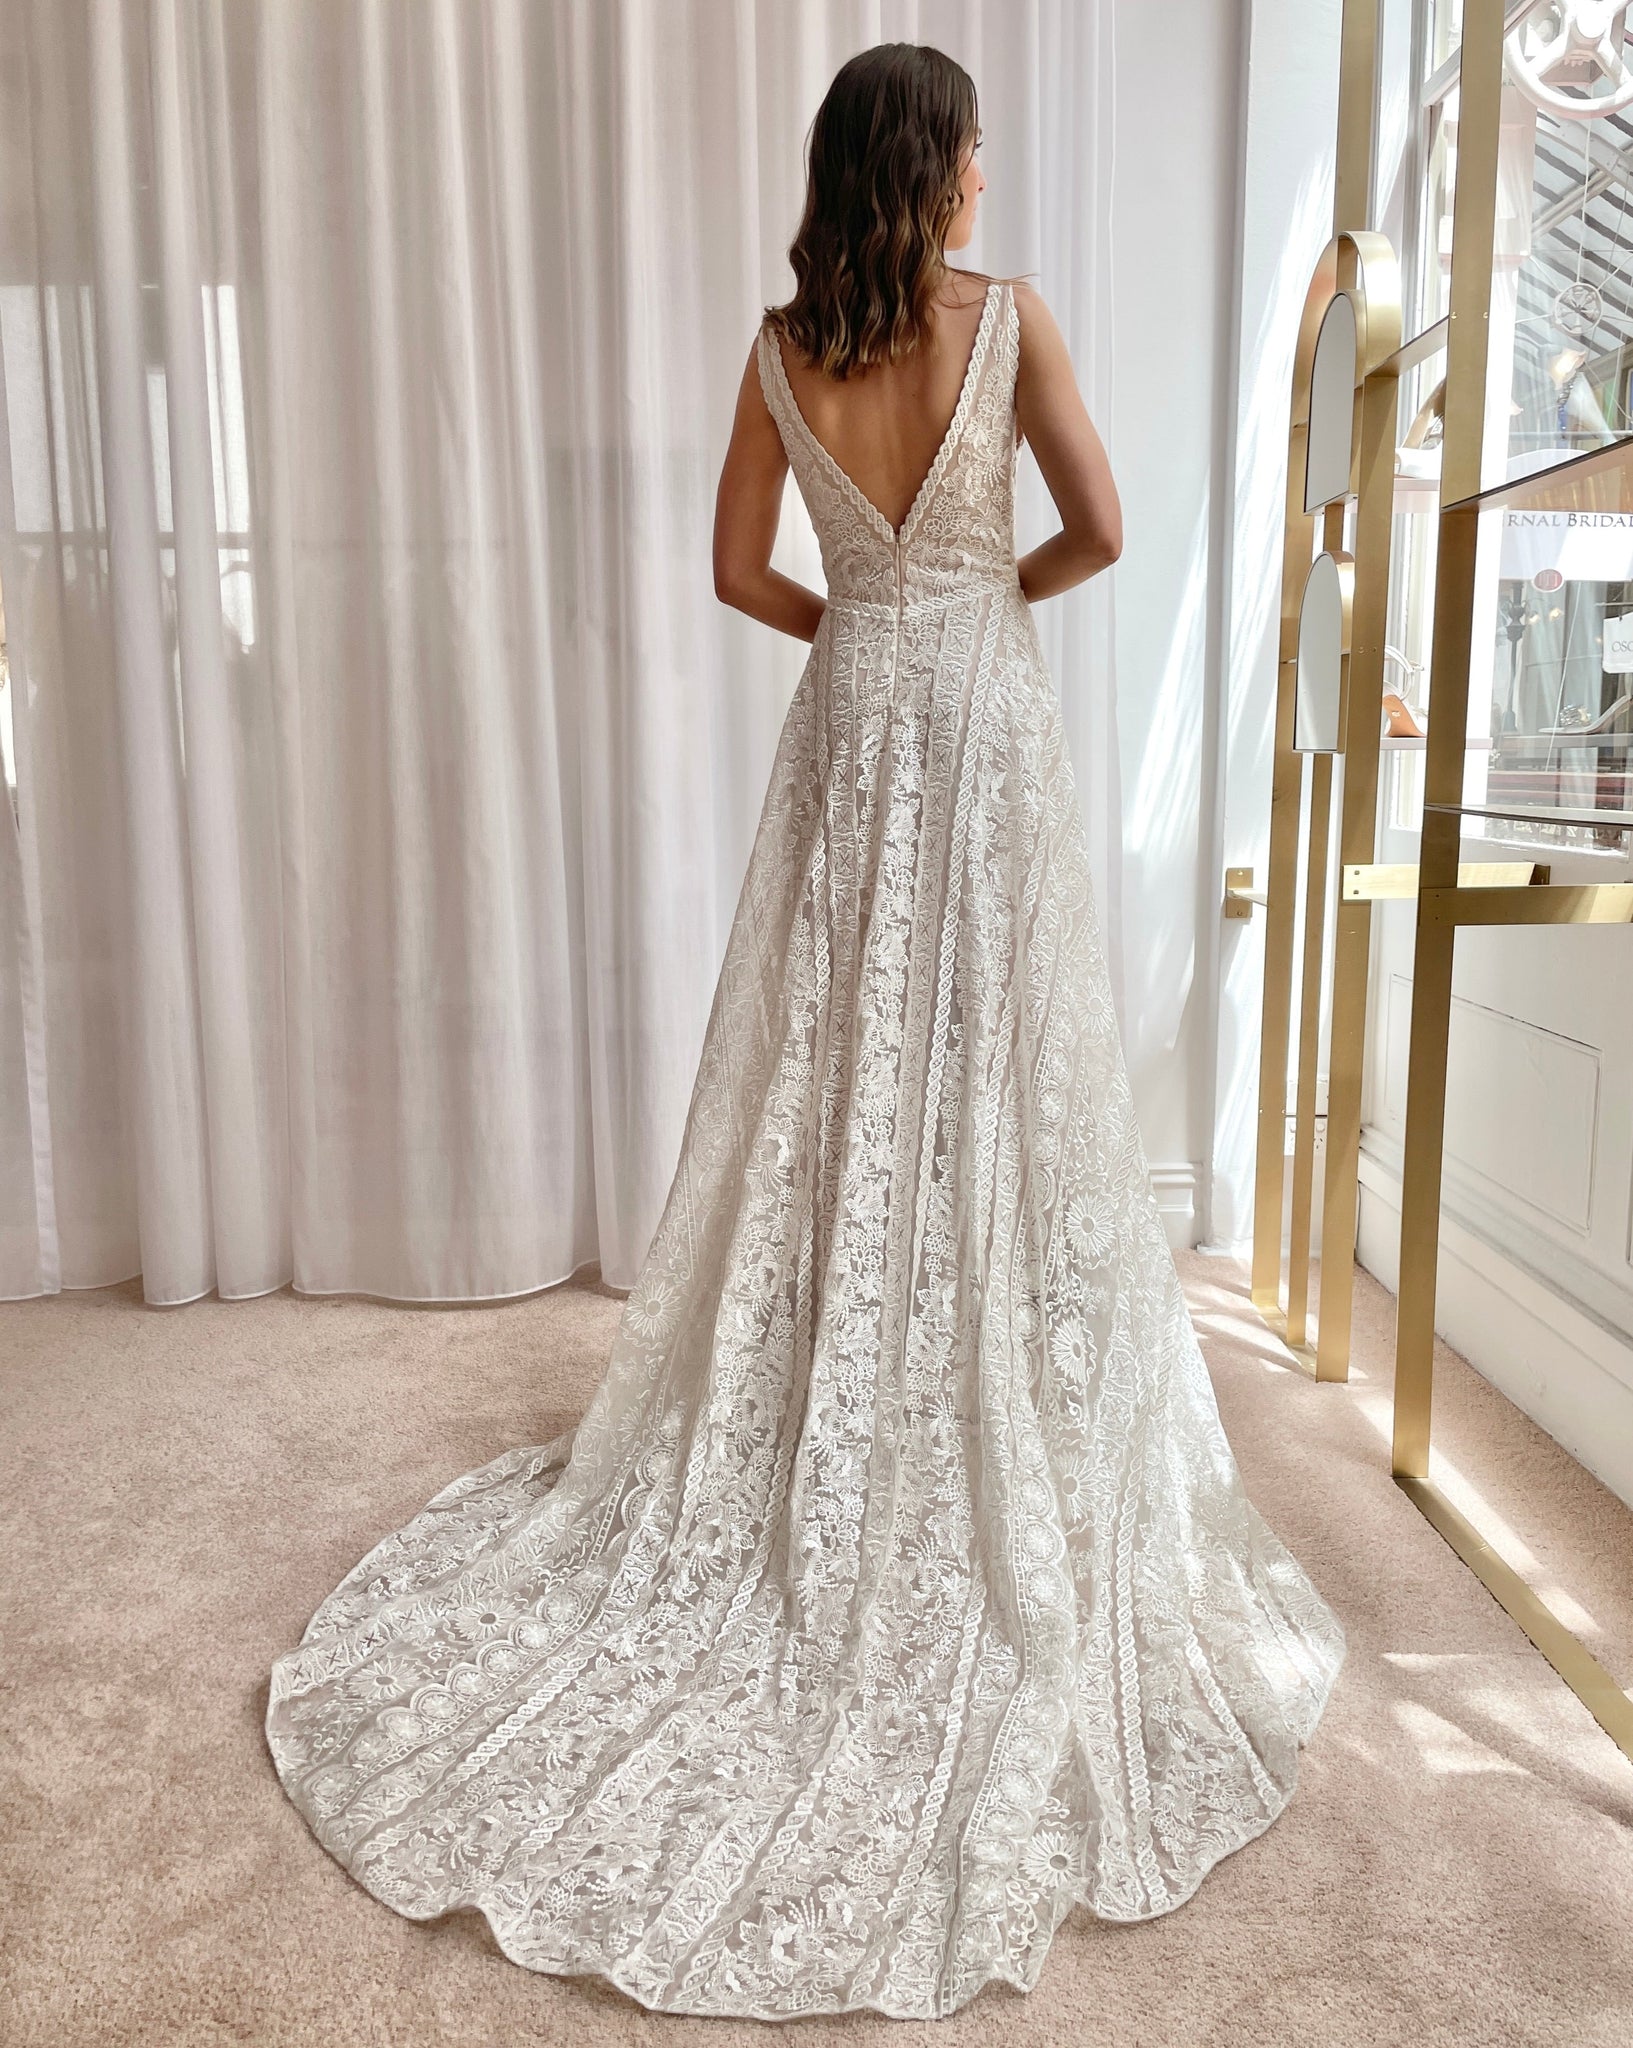 Cora - Sample Gown